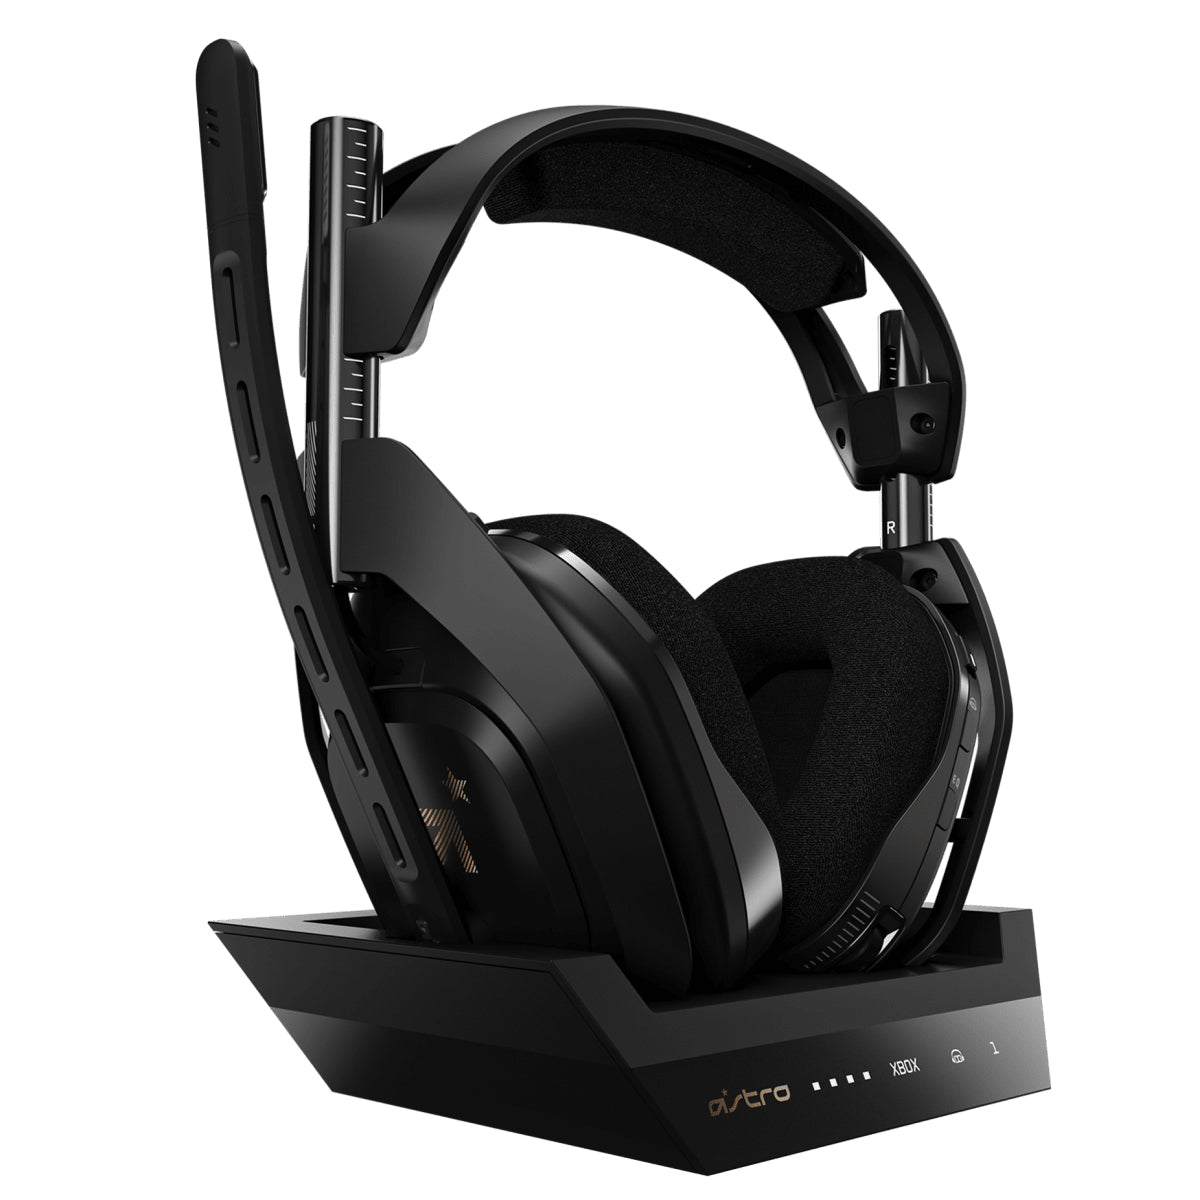 Astro A50 Wireless Dolby Gaming Headset for PC and Xbox - Black